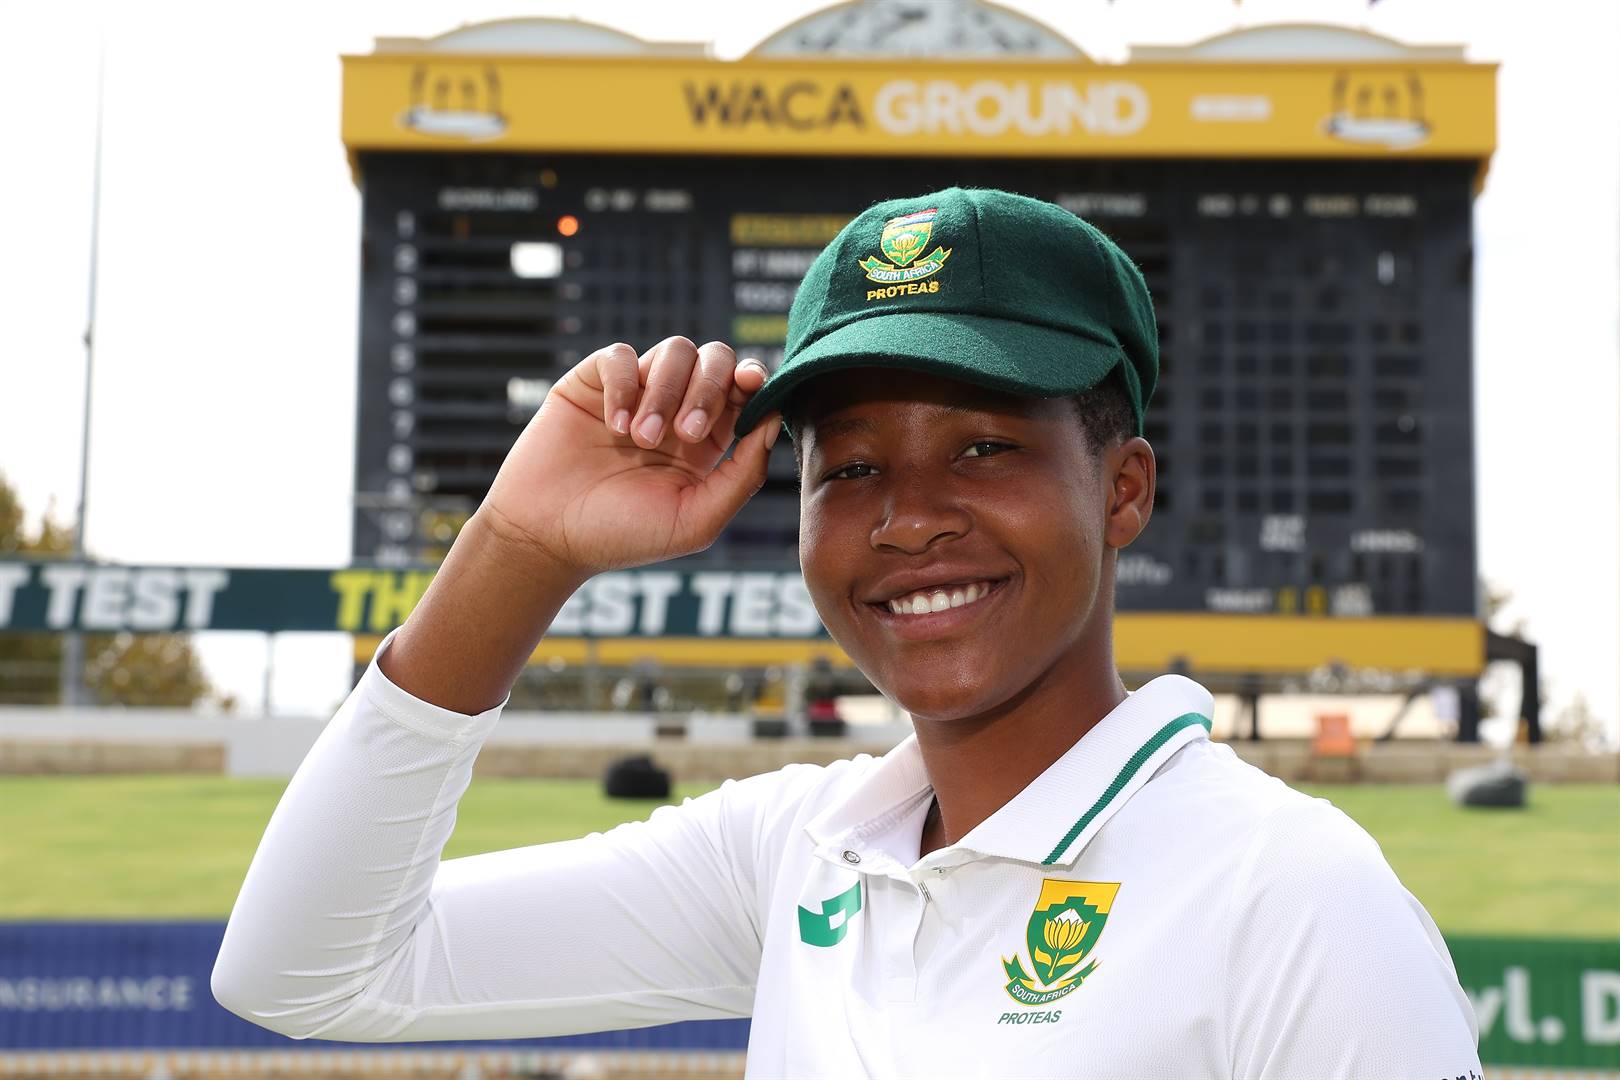 Ayanda Hlubi is one of the rising stars in women's cricket